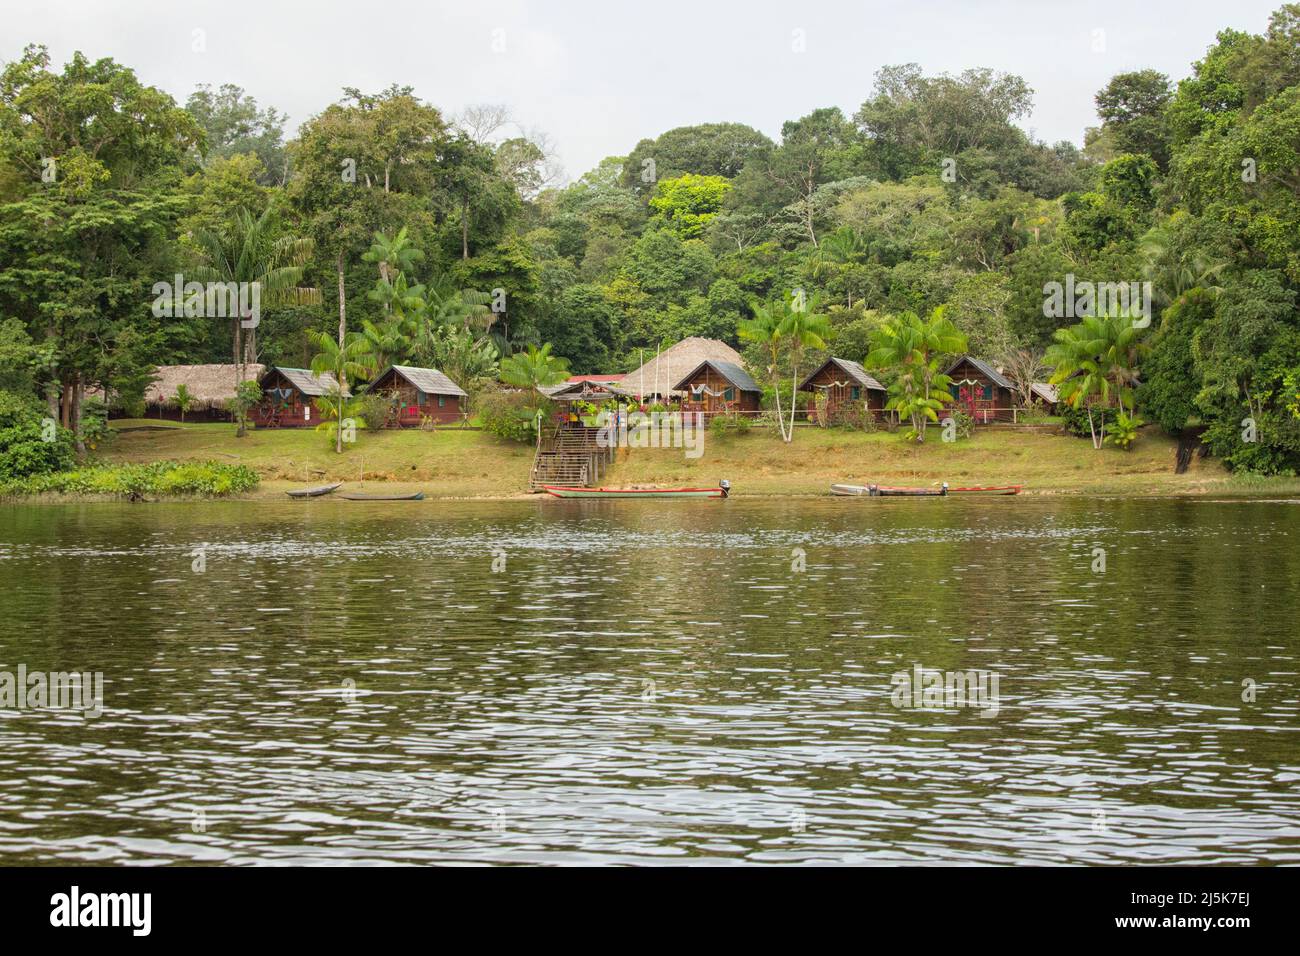 Eco-friendly Danpaati Lodge on the banks of Suriname River with a canoe moored, Upper Suriname, South America Stock Photo